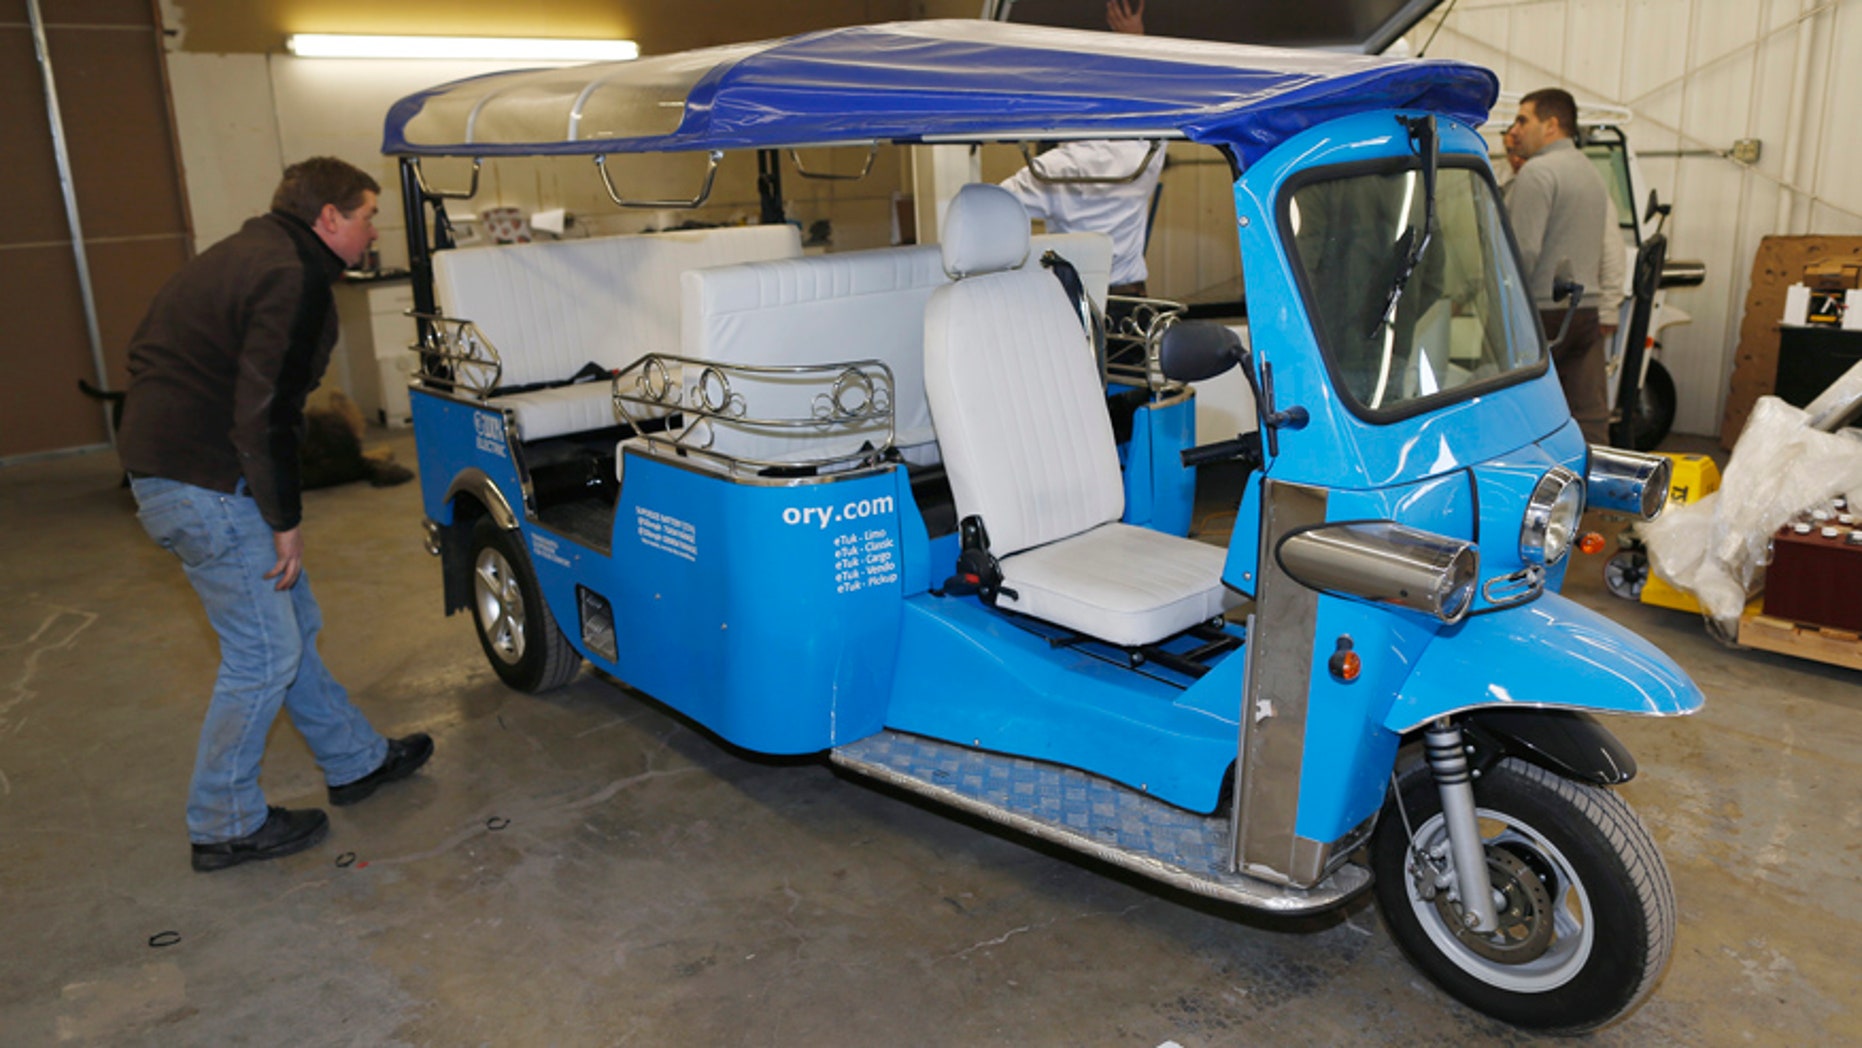 Tuktuk taxi maker aims to make inroads in US Fox News